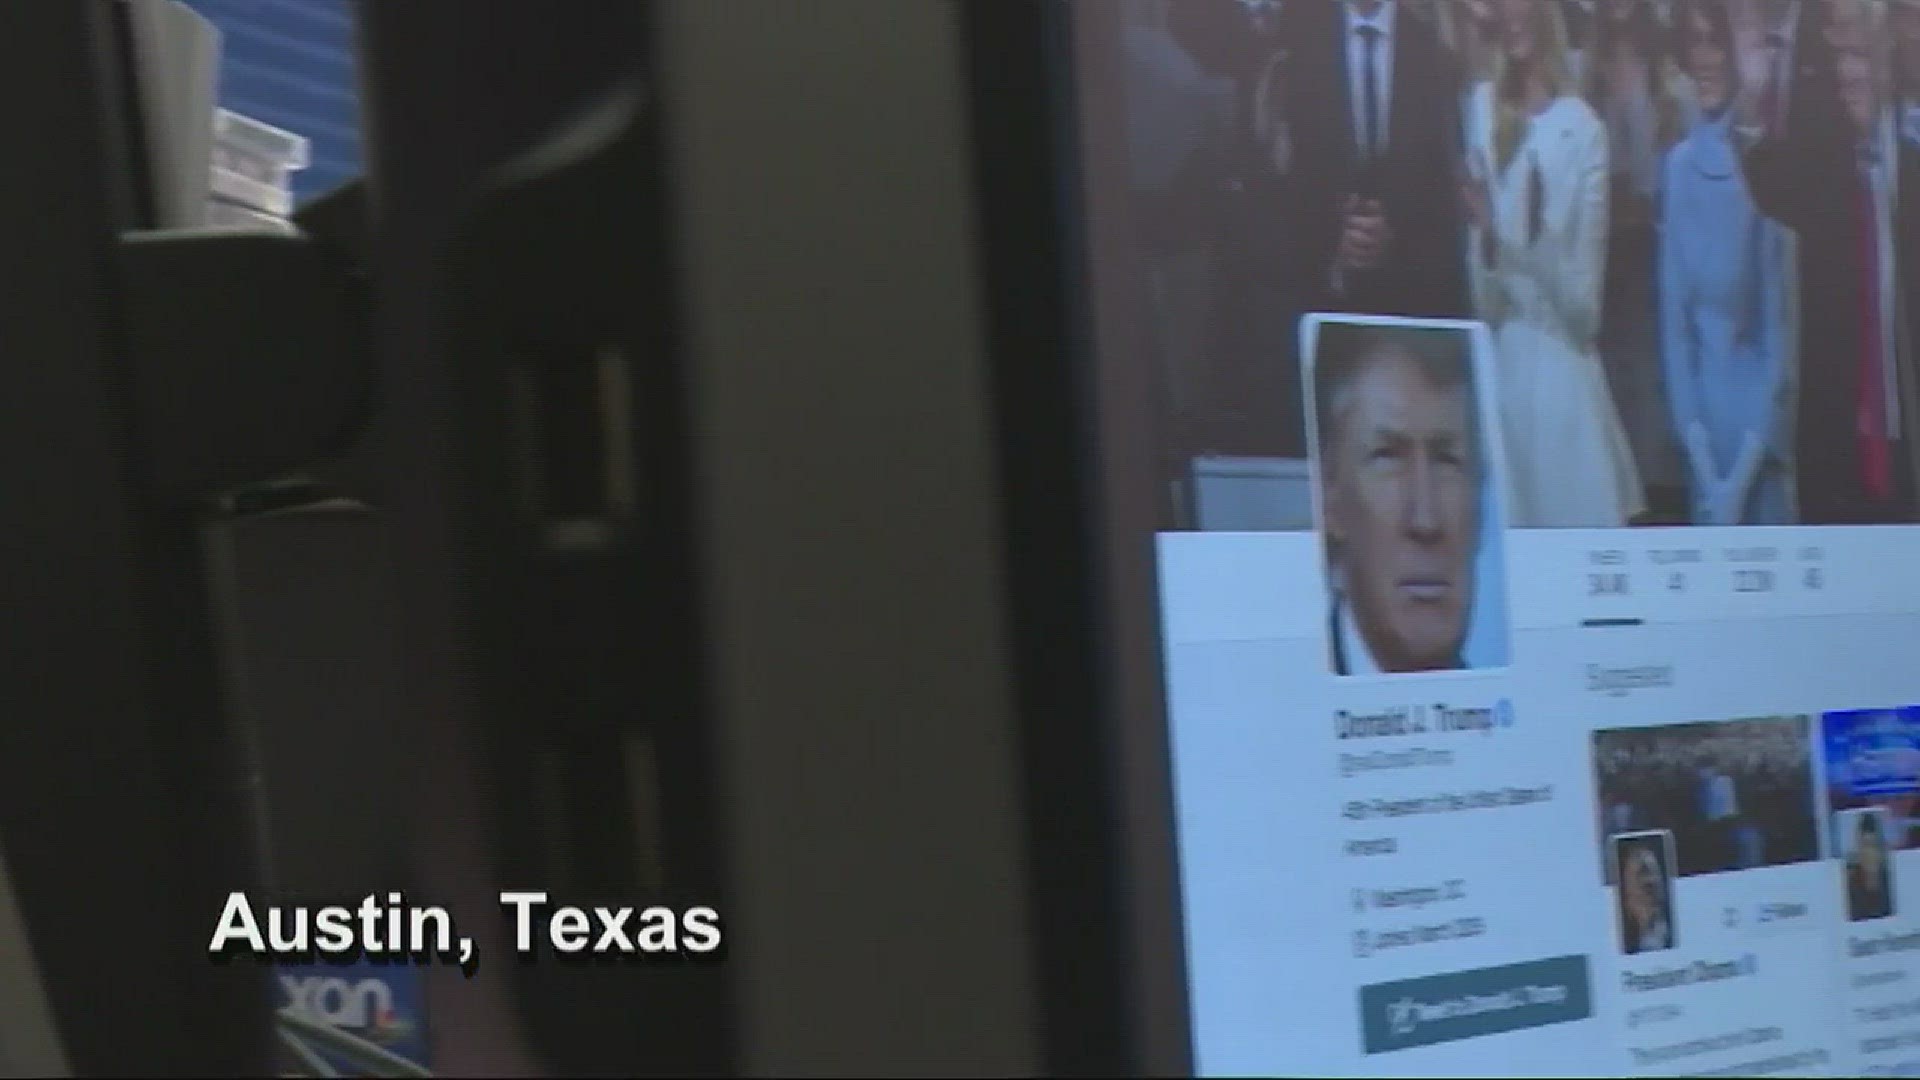 Austin company creates software that monitors President Trump's Twitter feed for "stock tips", then donates the profits to charity.